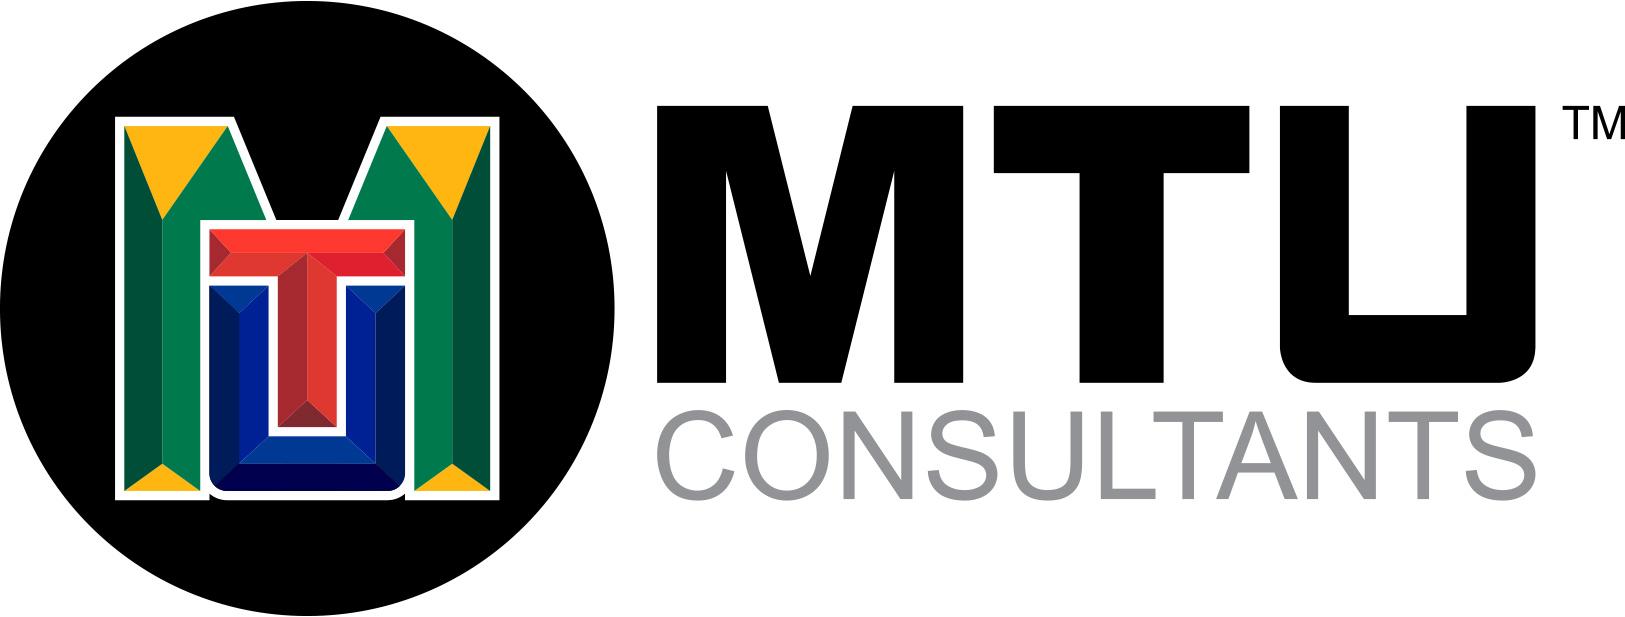 MTU Consultants - Permits Expediting for Construction